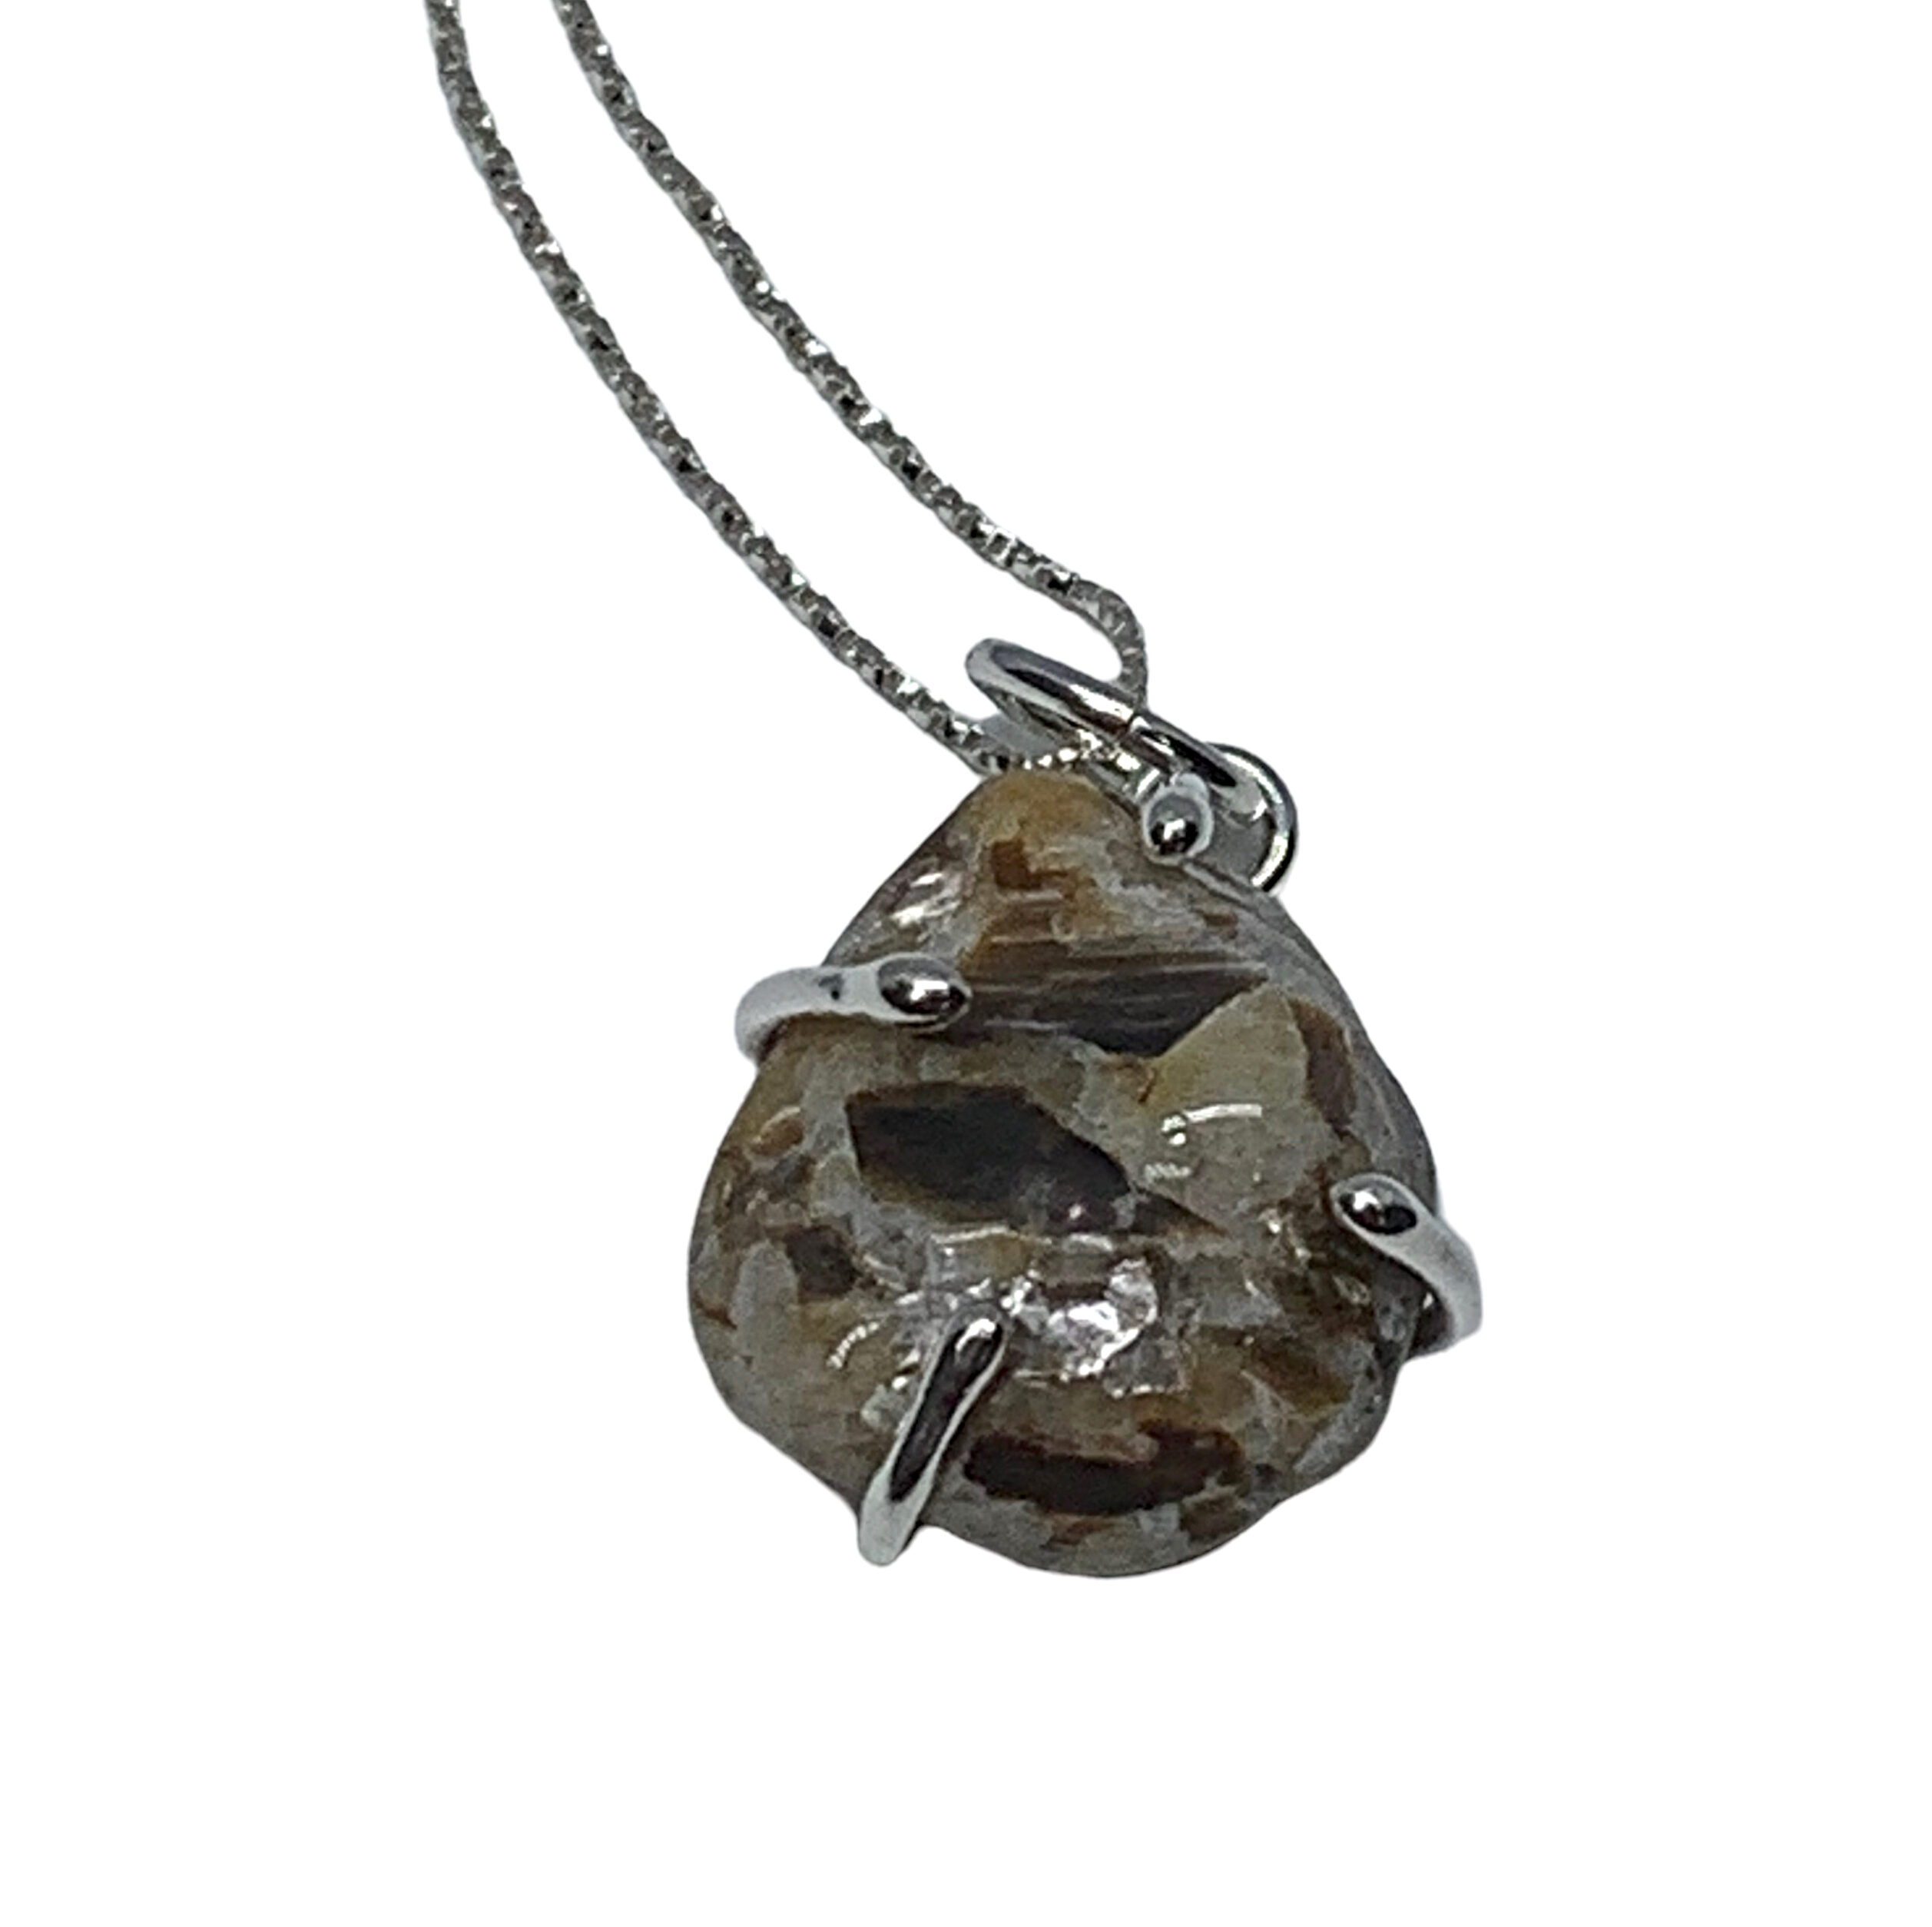 Locally handmade silver + polished beach stone necklace by A&R Jewellery | Effusion Art Gallery + Cast Glass Studio, Invermere BC